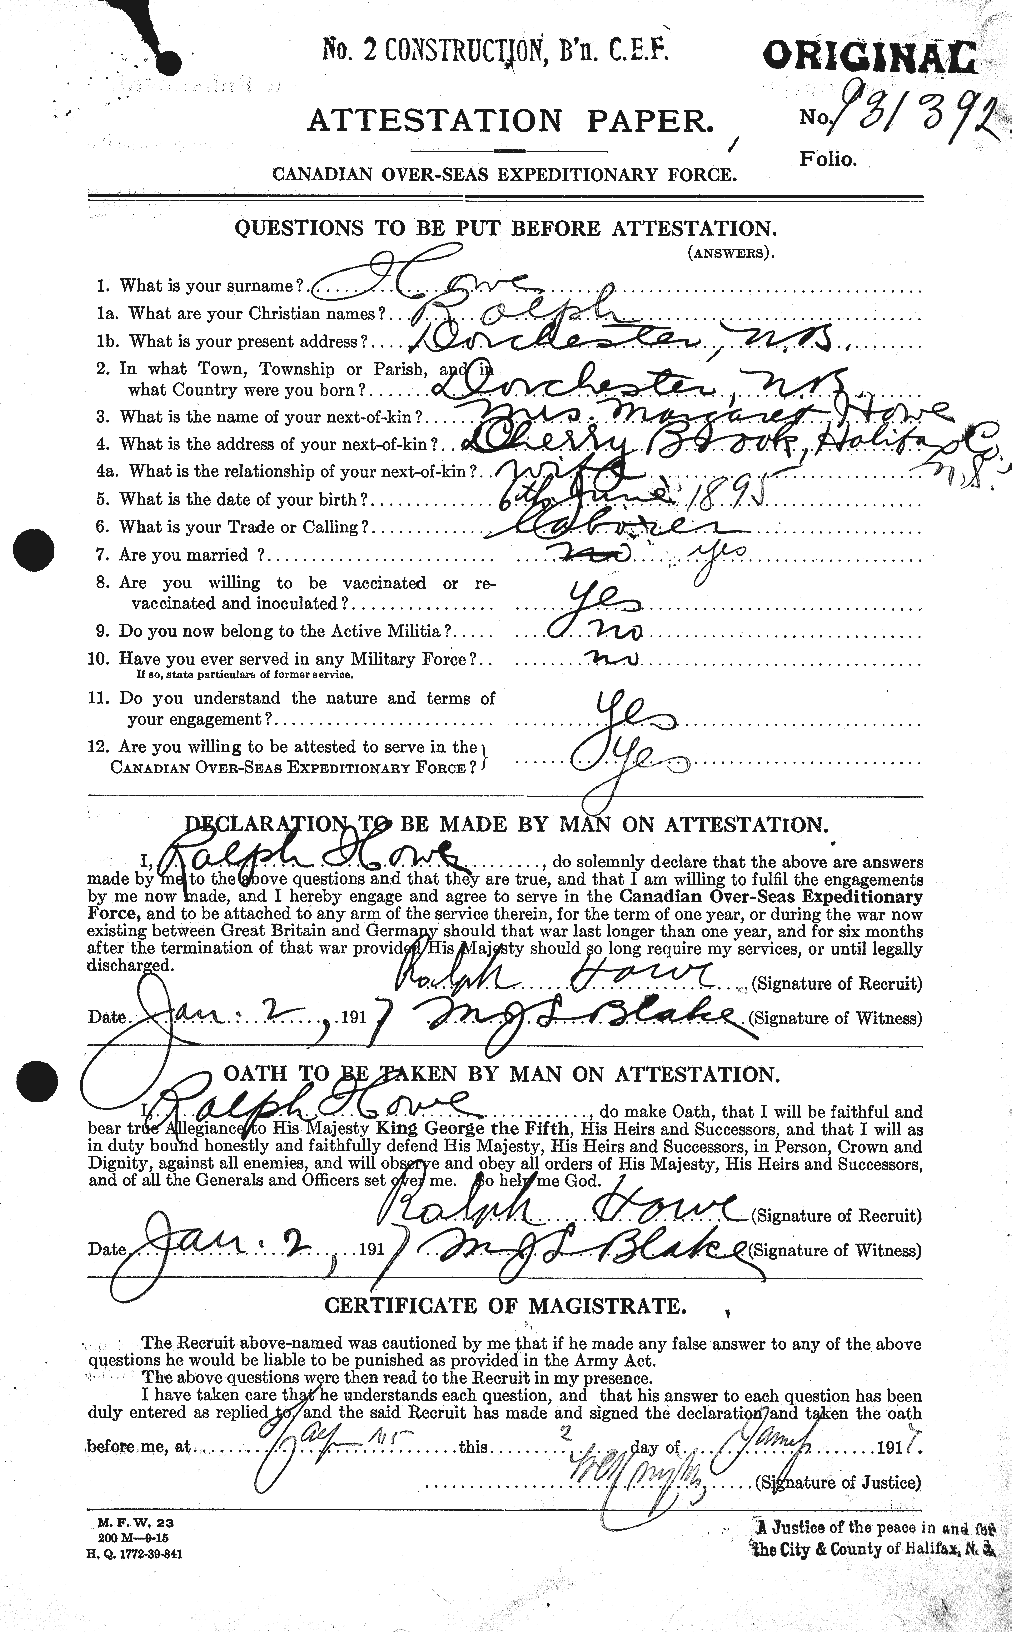 Personnel Records of the First World War - CEF 402084a